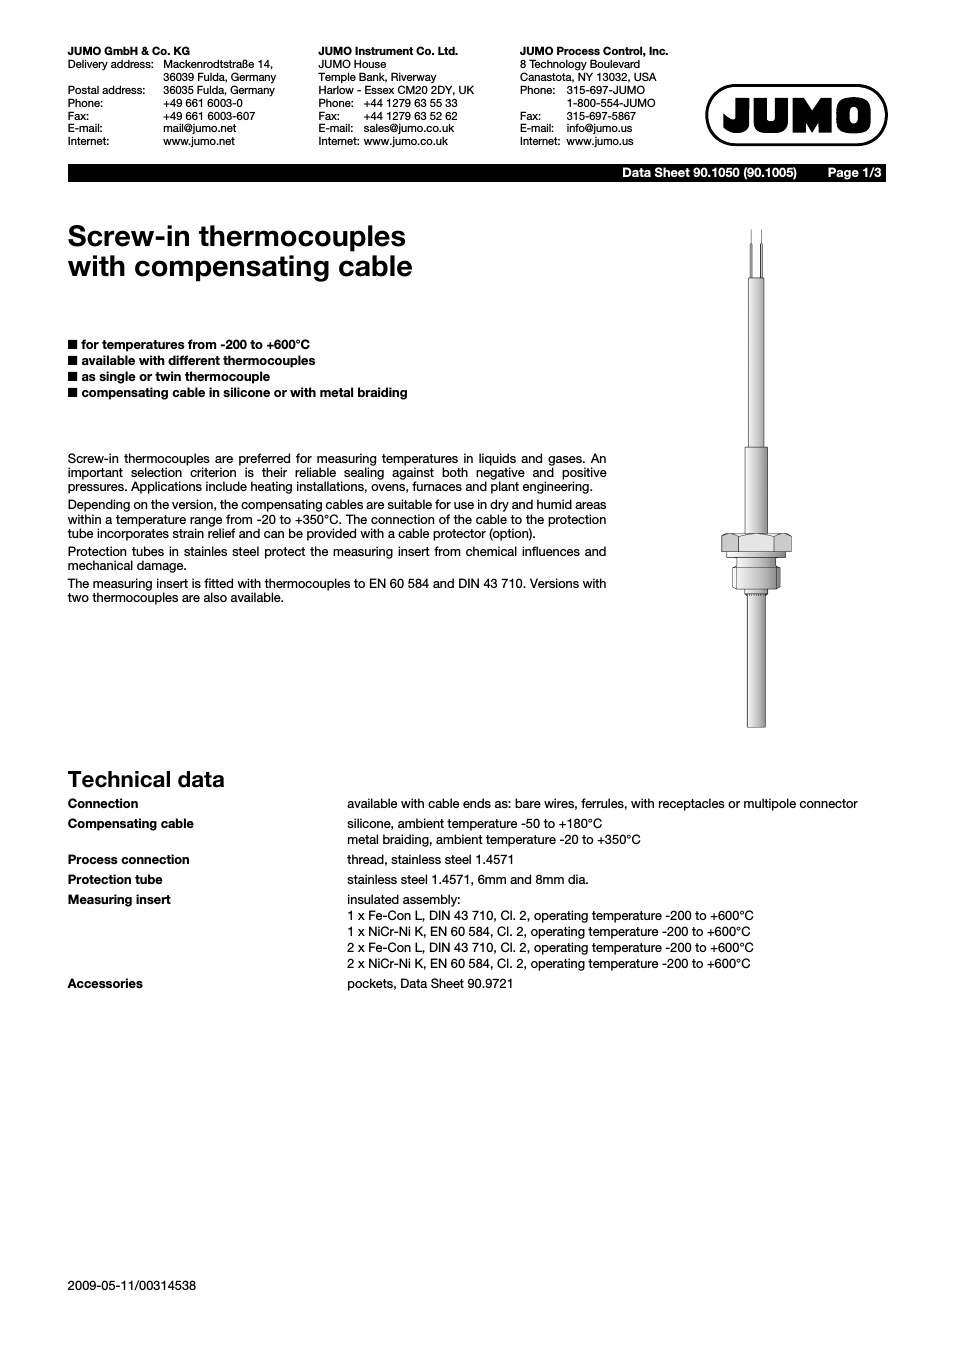 901050 Screw-In Thermocouples with Compensating Cable Data Sheet